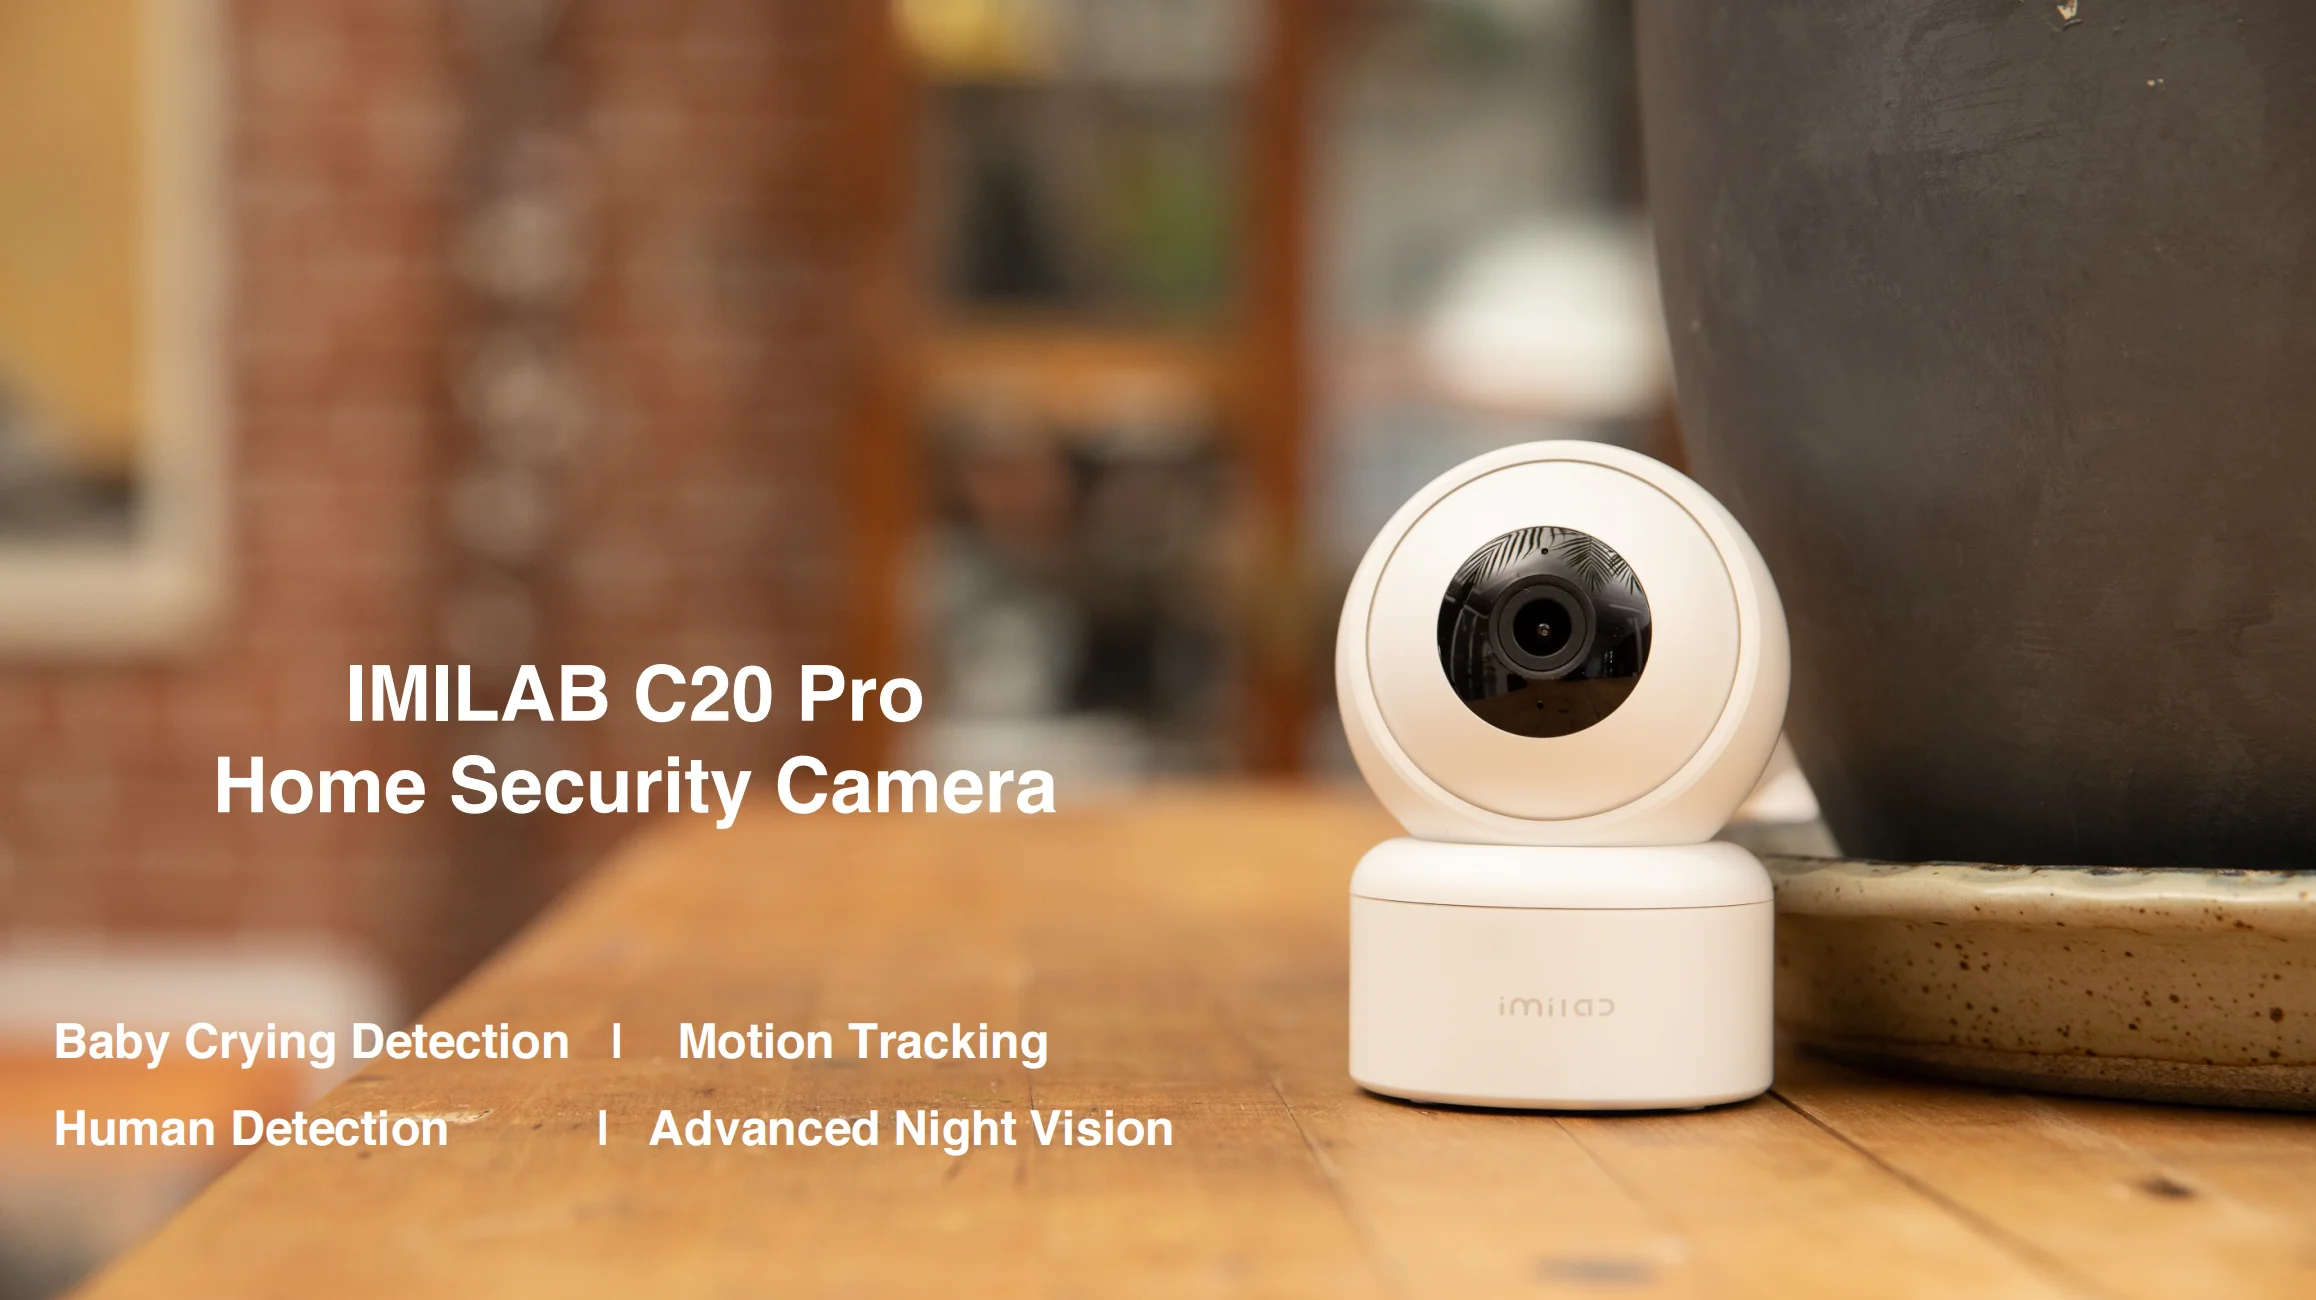 IMILAB C20 Pro Home Security Camera